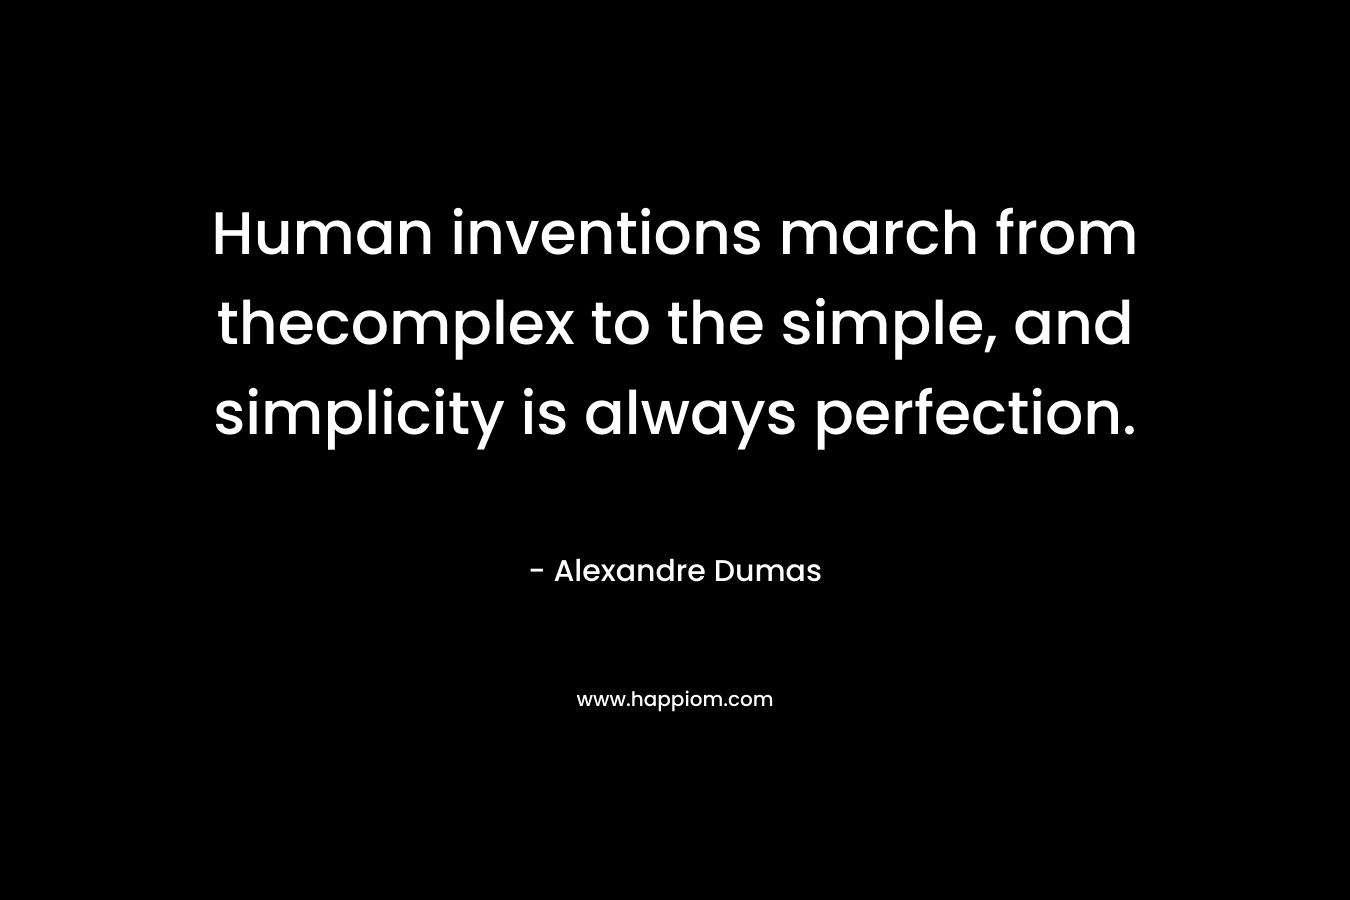 Human inventions march from thecomplex to the simple, and simplicity is always perfection. – Alexandre Dumas